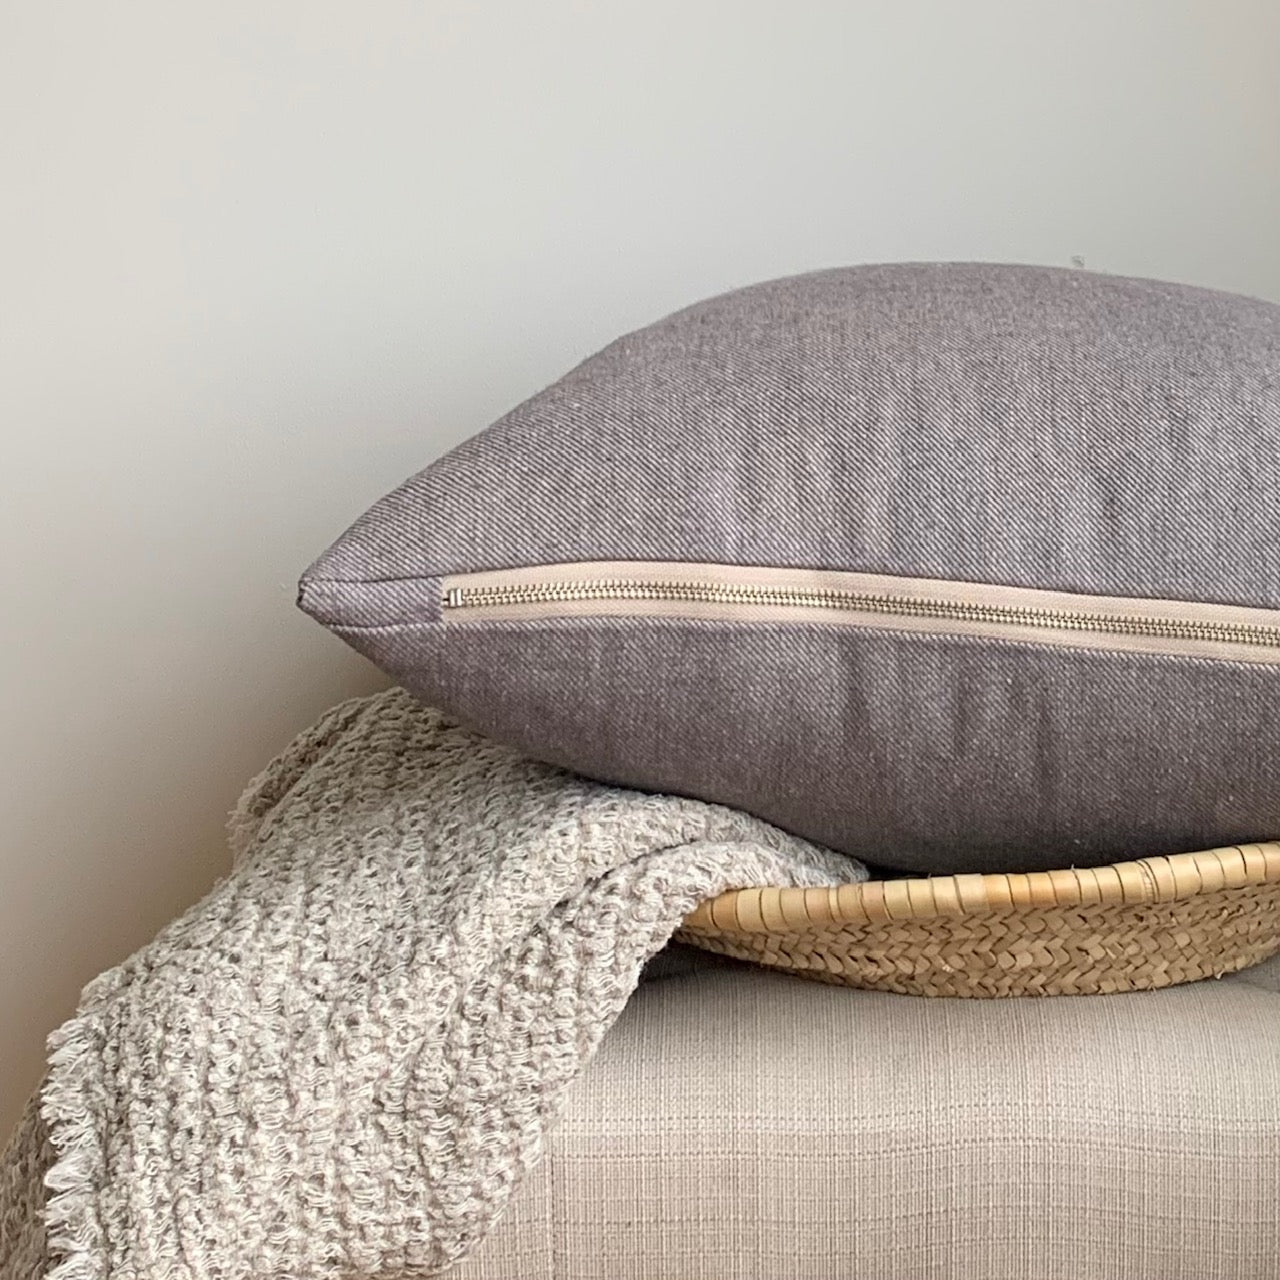 These beautiful 100% linen pillow covers are made from the finest Oeko-Tex® certified linen and feature an exposed contrasting zipper. This linen has been washed to produce a soft to the touch finish and reduced shrinking.  Luxurious yet casual, linen is a  classic that works beautifully in any space.  Made to order. These pillow covers are handmade in Canada.  Pillow cover only - insert not included.  Size: 20x20 inches